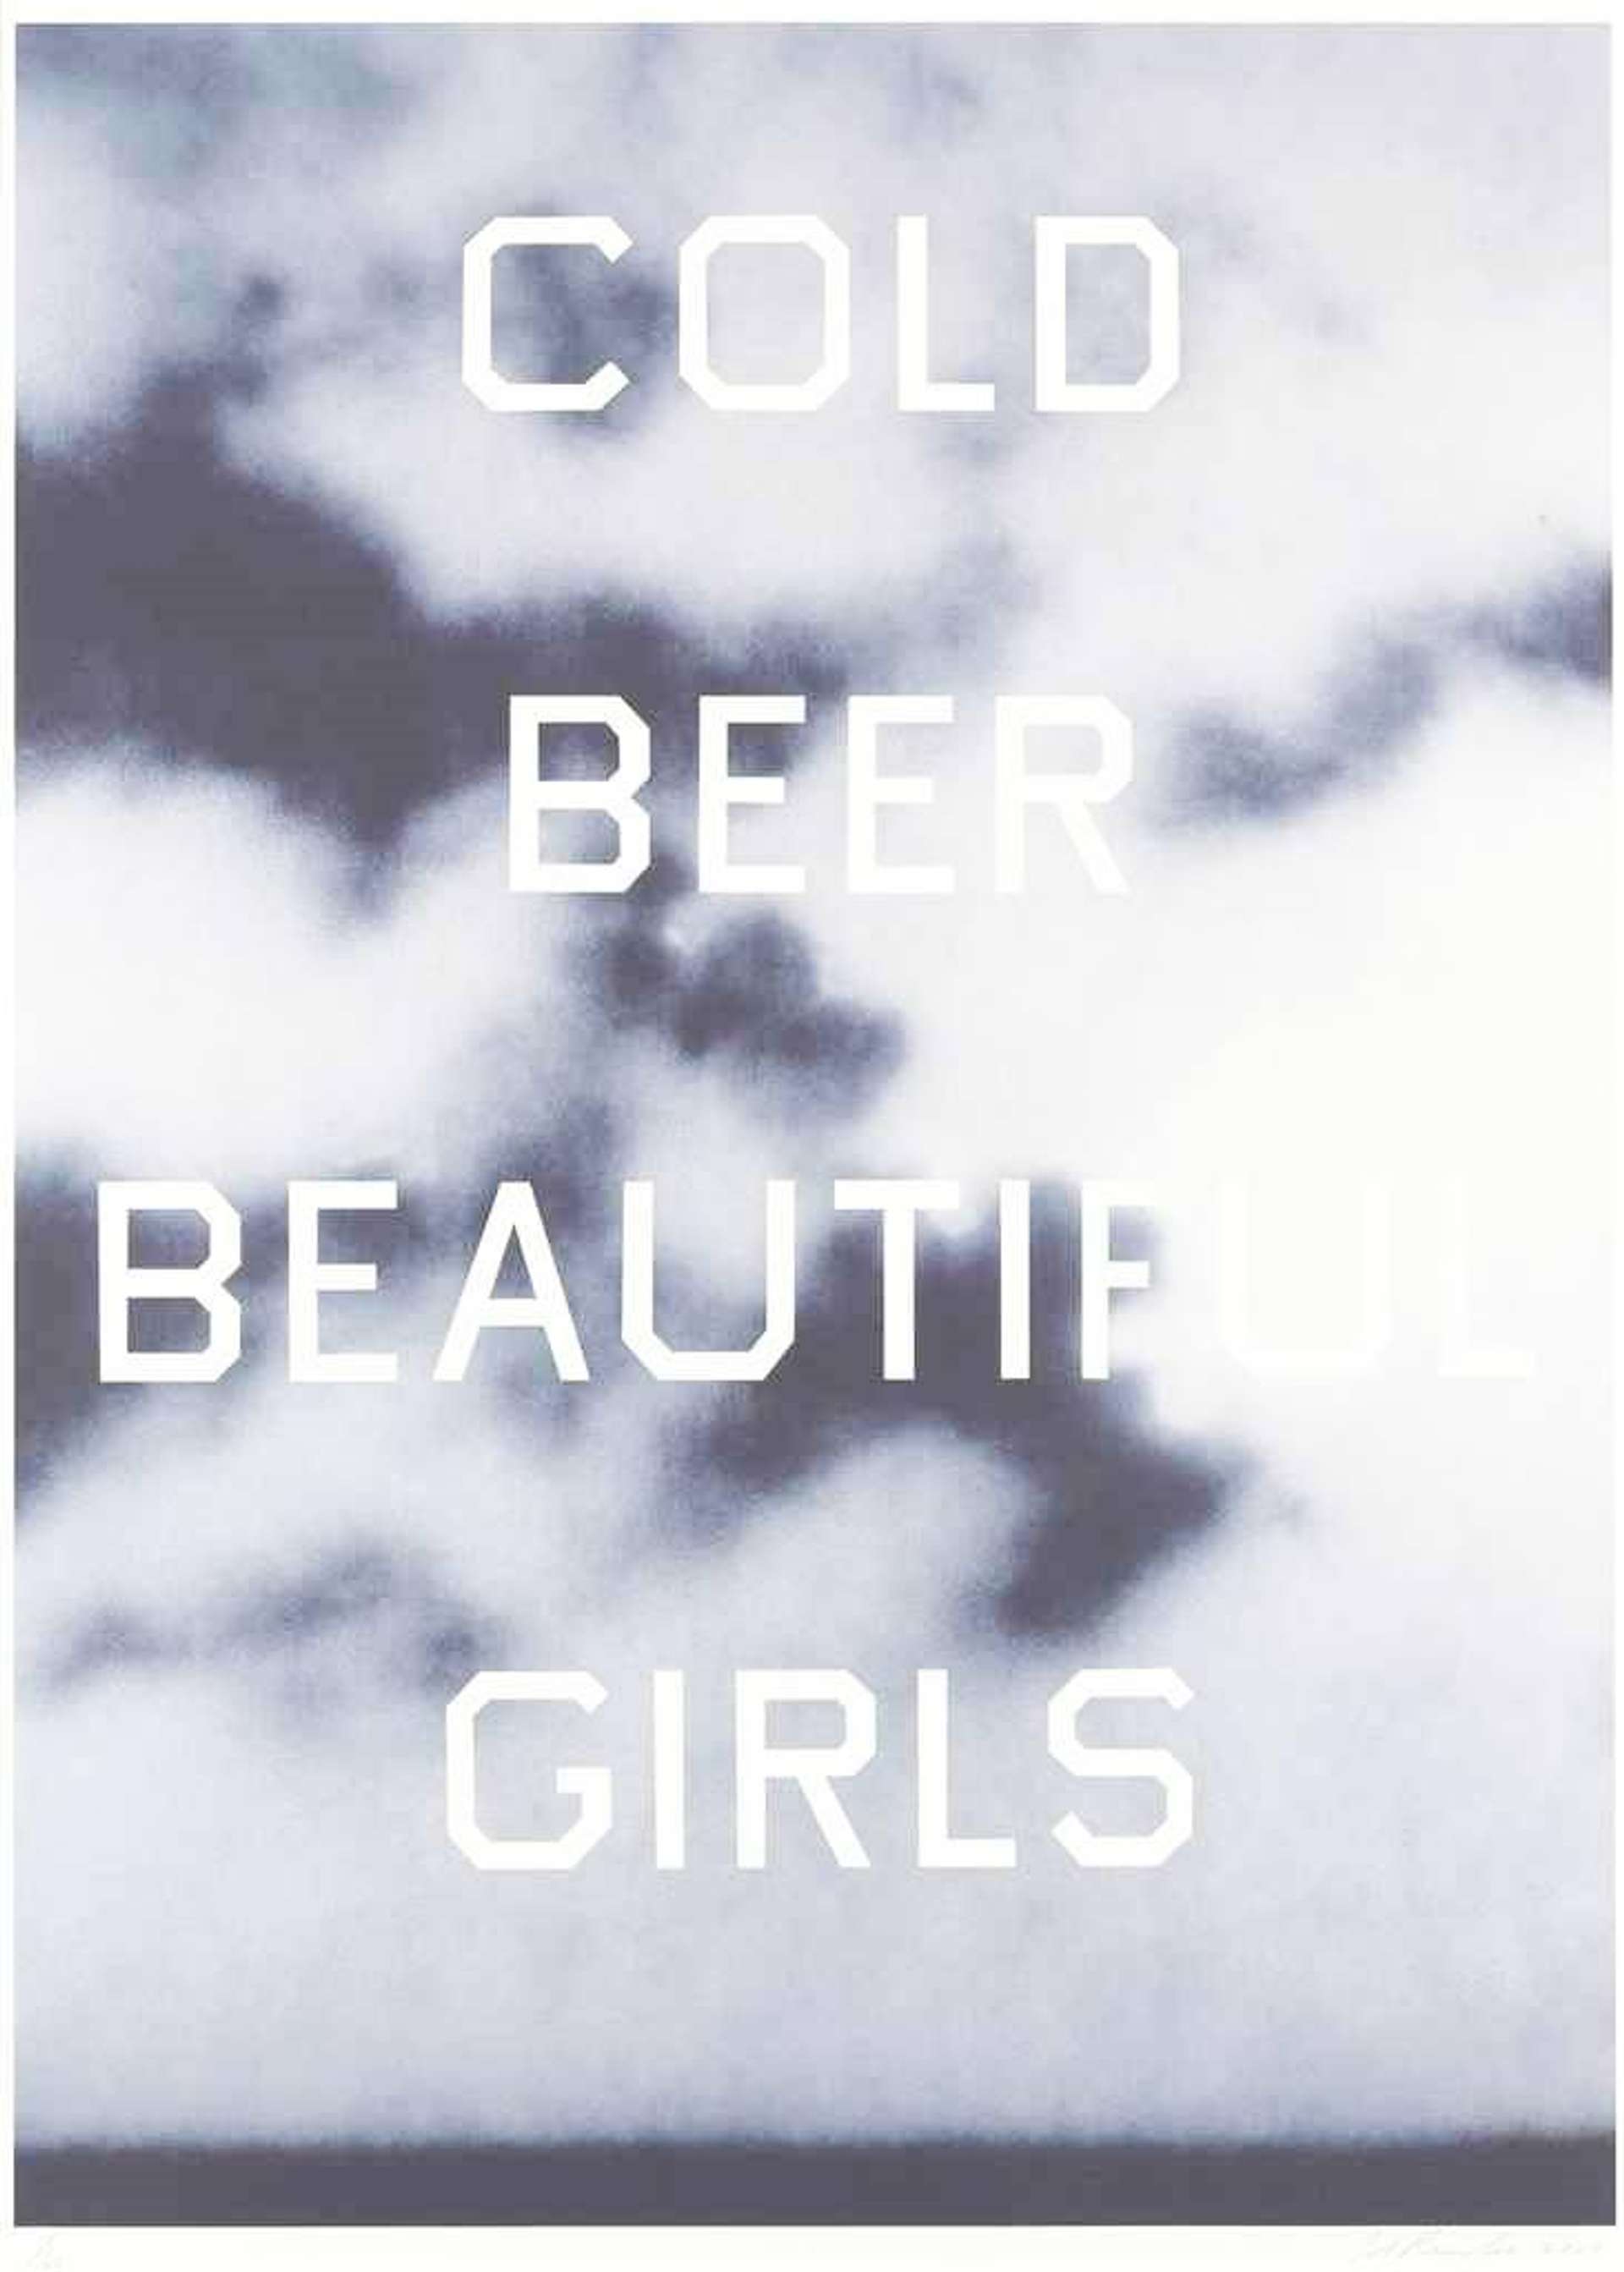 Acrylic painting by Ed Ruscha, depicting the centred words 'cold beer beautiful girls' in bold, capitalised white lettering against a background of a cloudy sky.